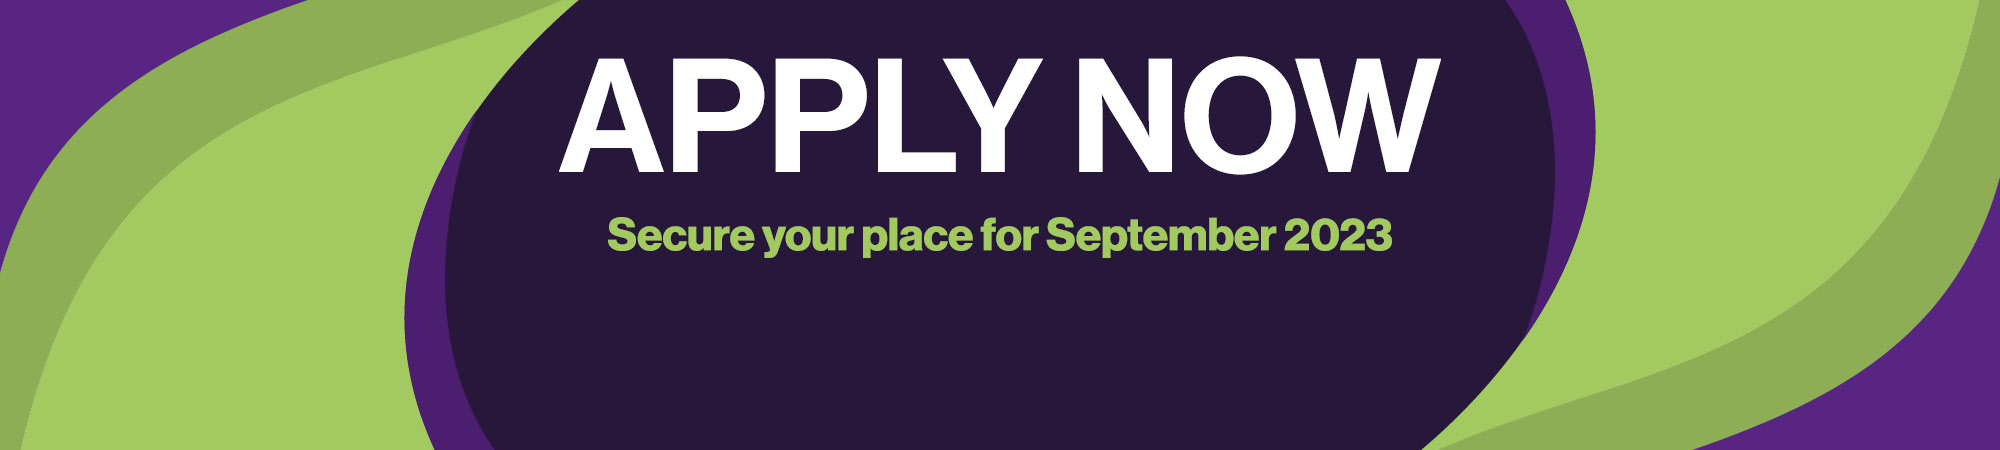 Artwork with 'Apply Now' written on